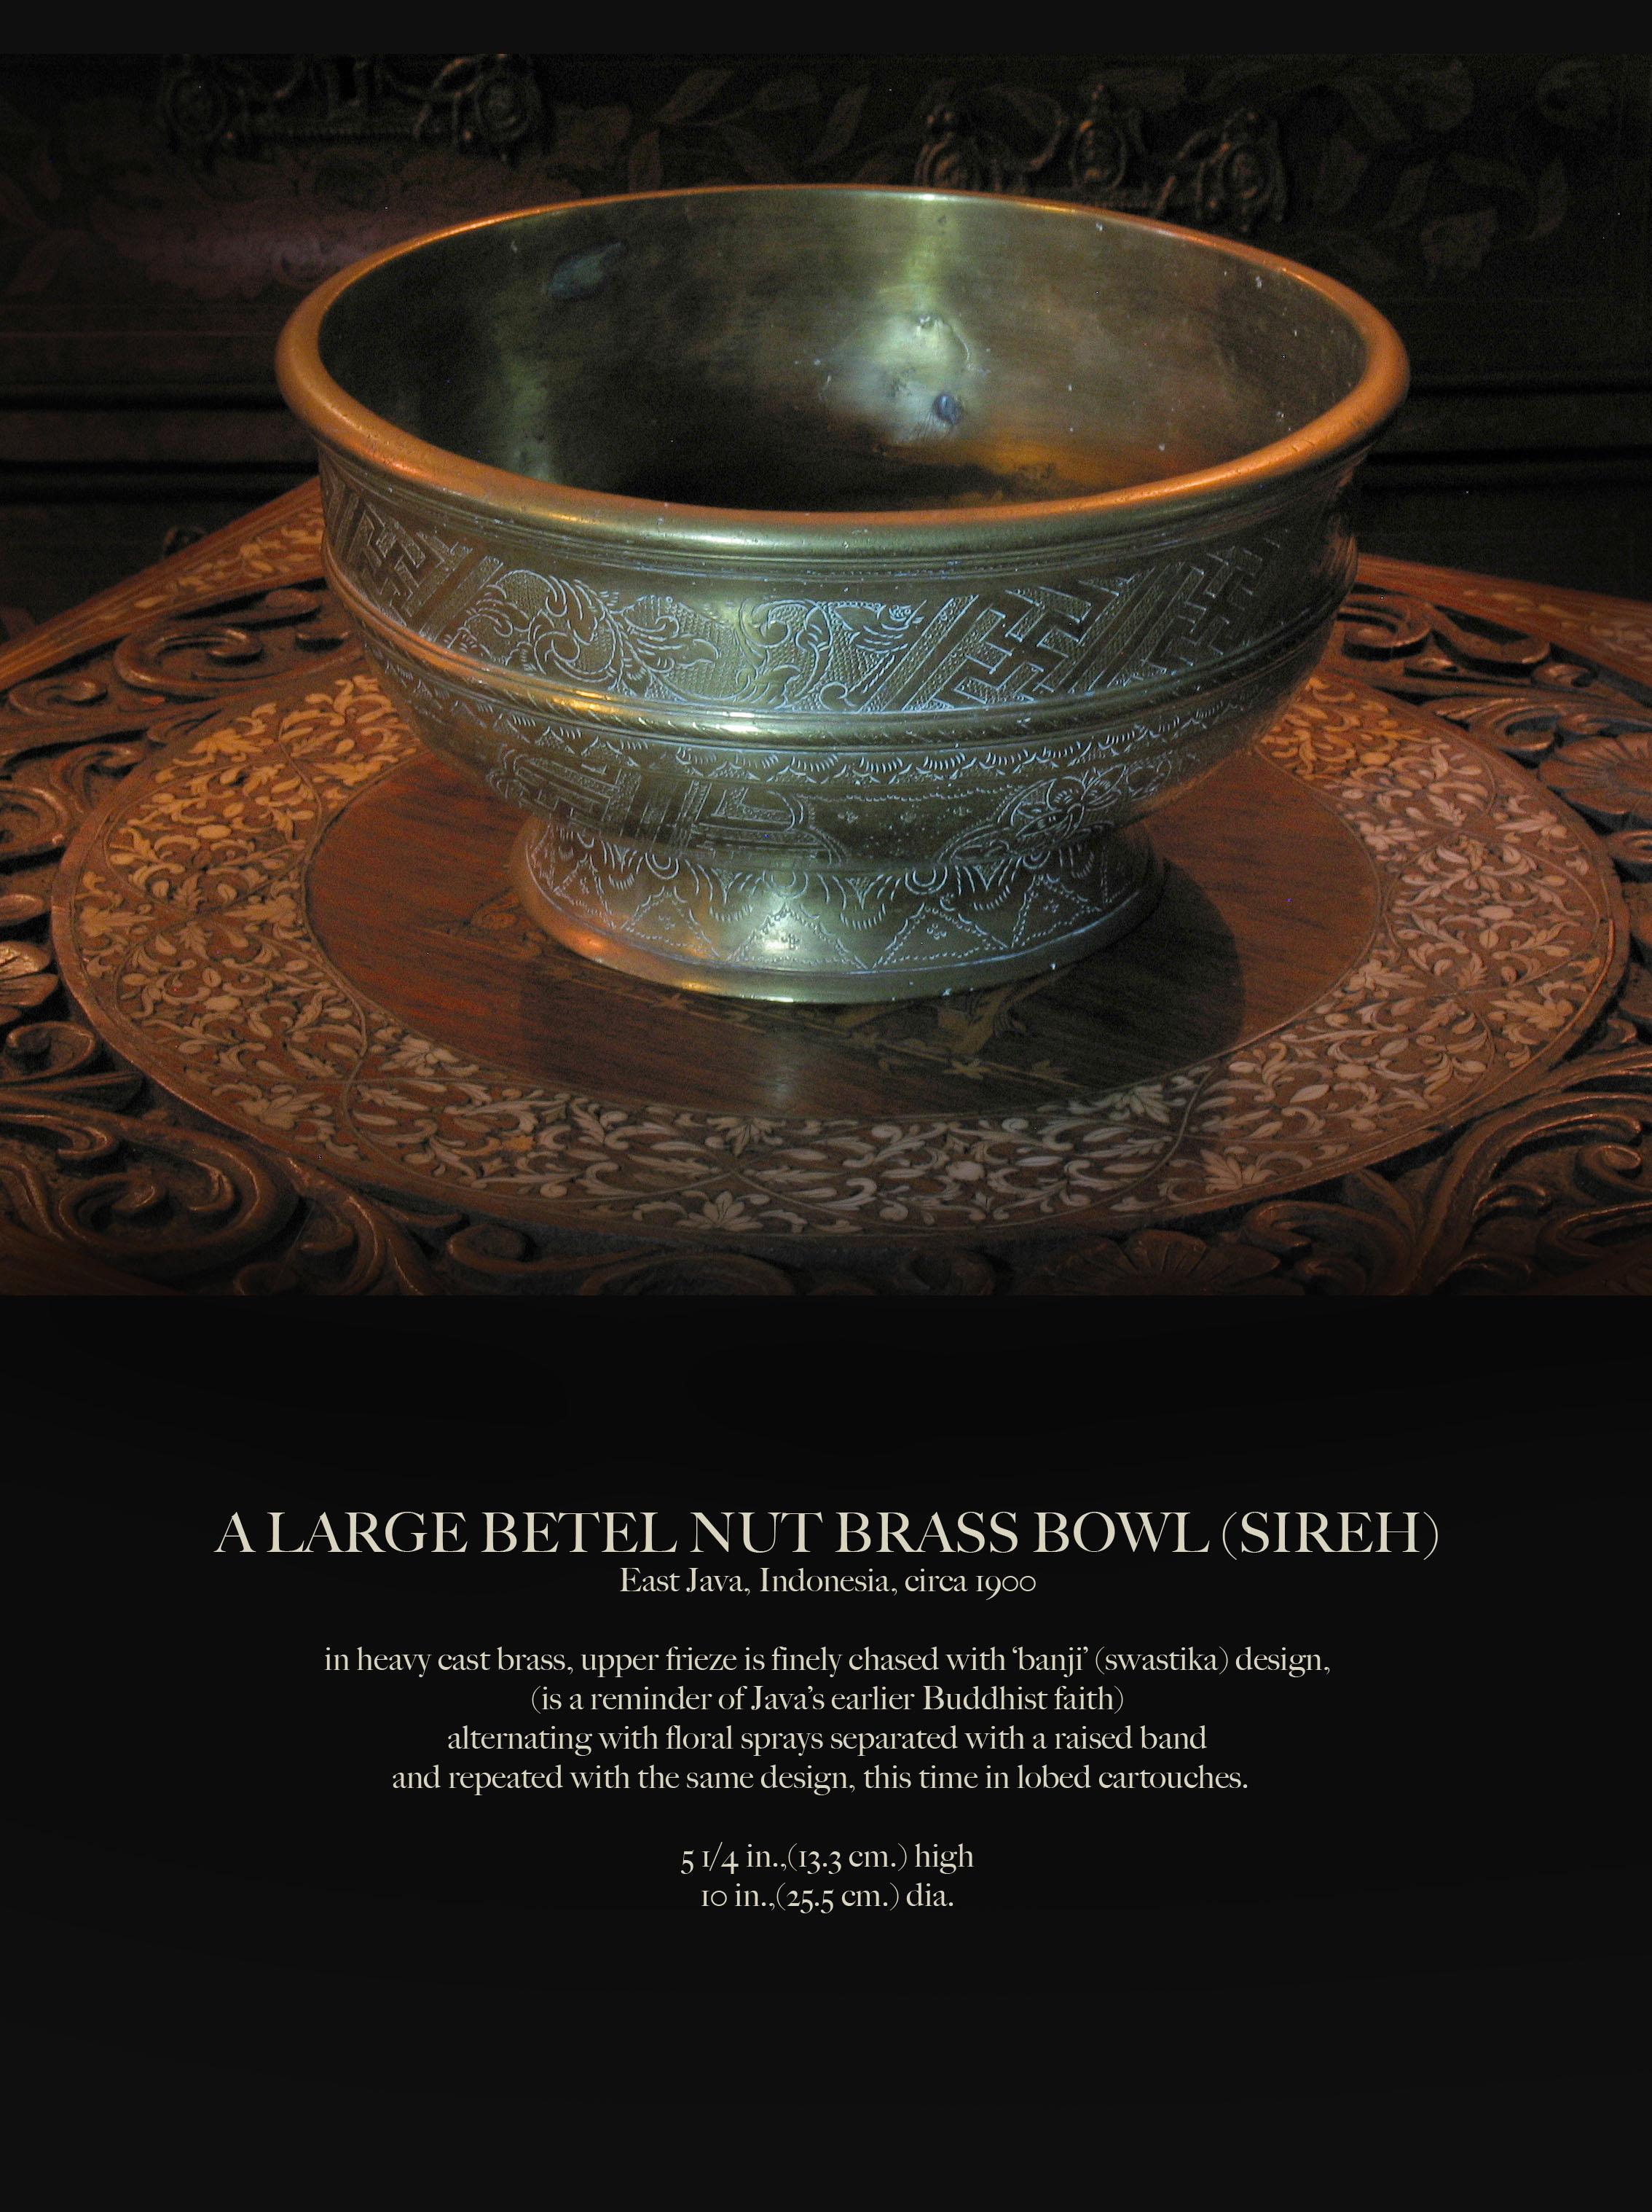 A large betel nut brass bowl (Sireh)
East Java, Indonesia, circa 1900

In heavy cast brass, upper frieze is finely chased with ‘banji’ (swastika) design,
(is a reminder of Java’s earlier Buddhist faith)
alternating with floral sprays separated